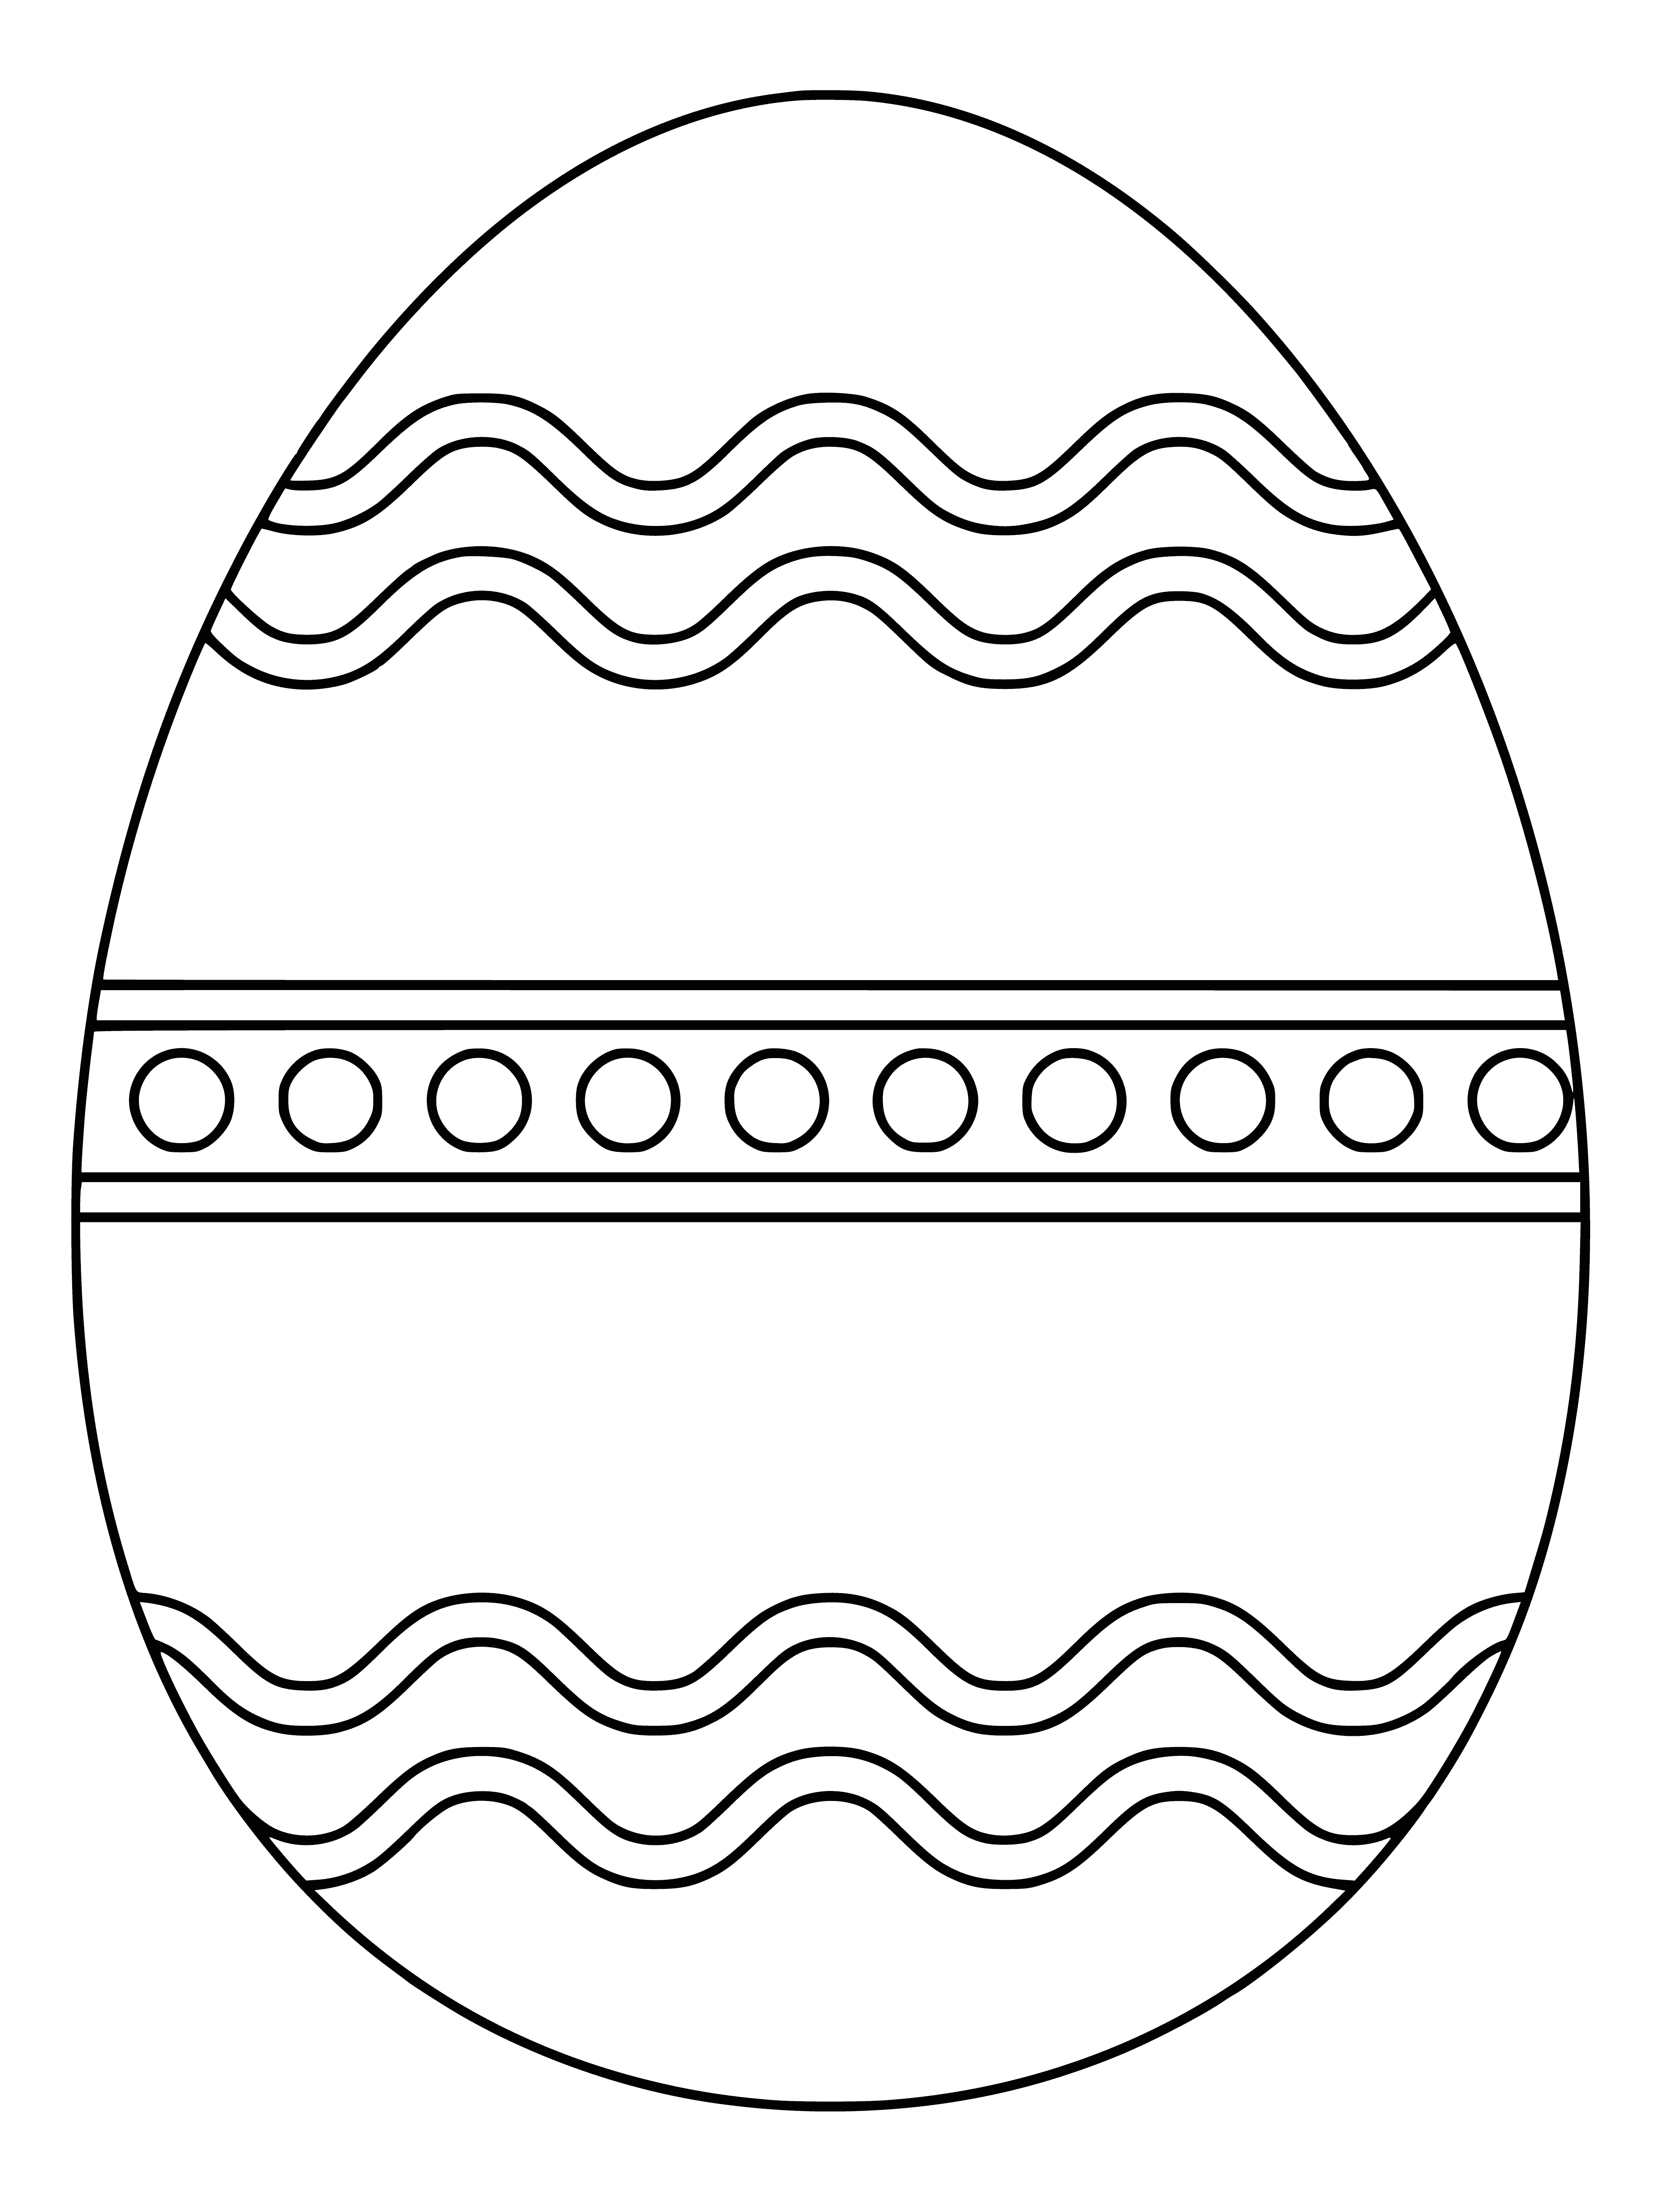 coloring page: On the Easter Egg: Bunny rabbit with a blue bowtie, yellow basket full of Easter eggs, two chicks - one peeking, one sitting.